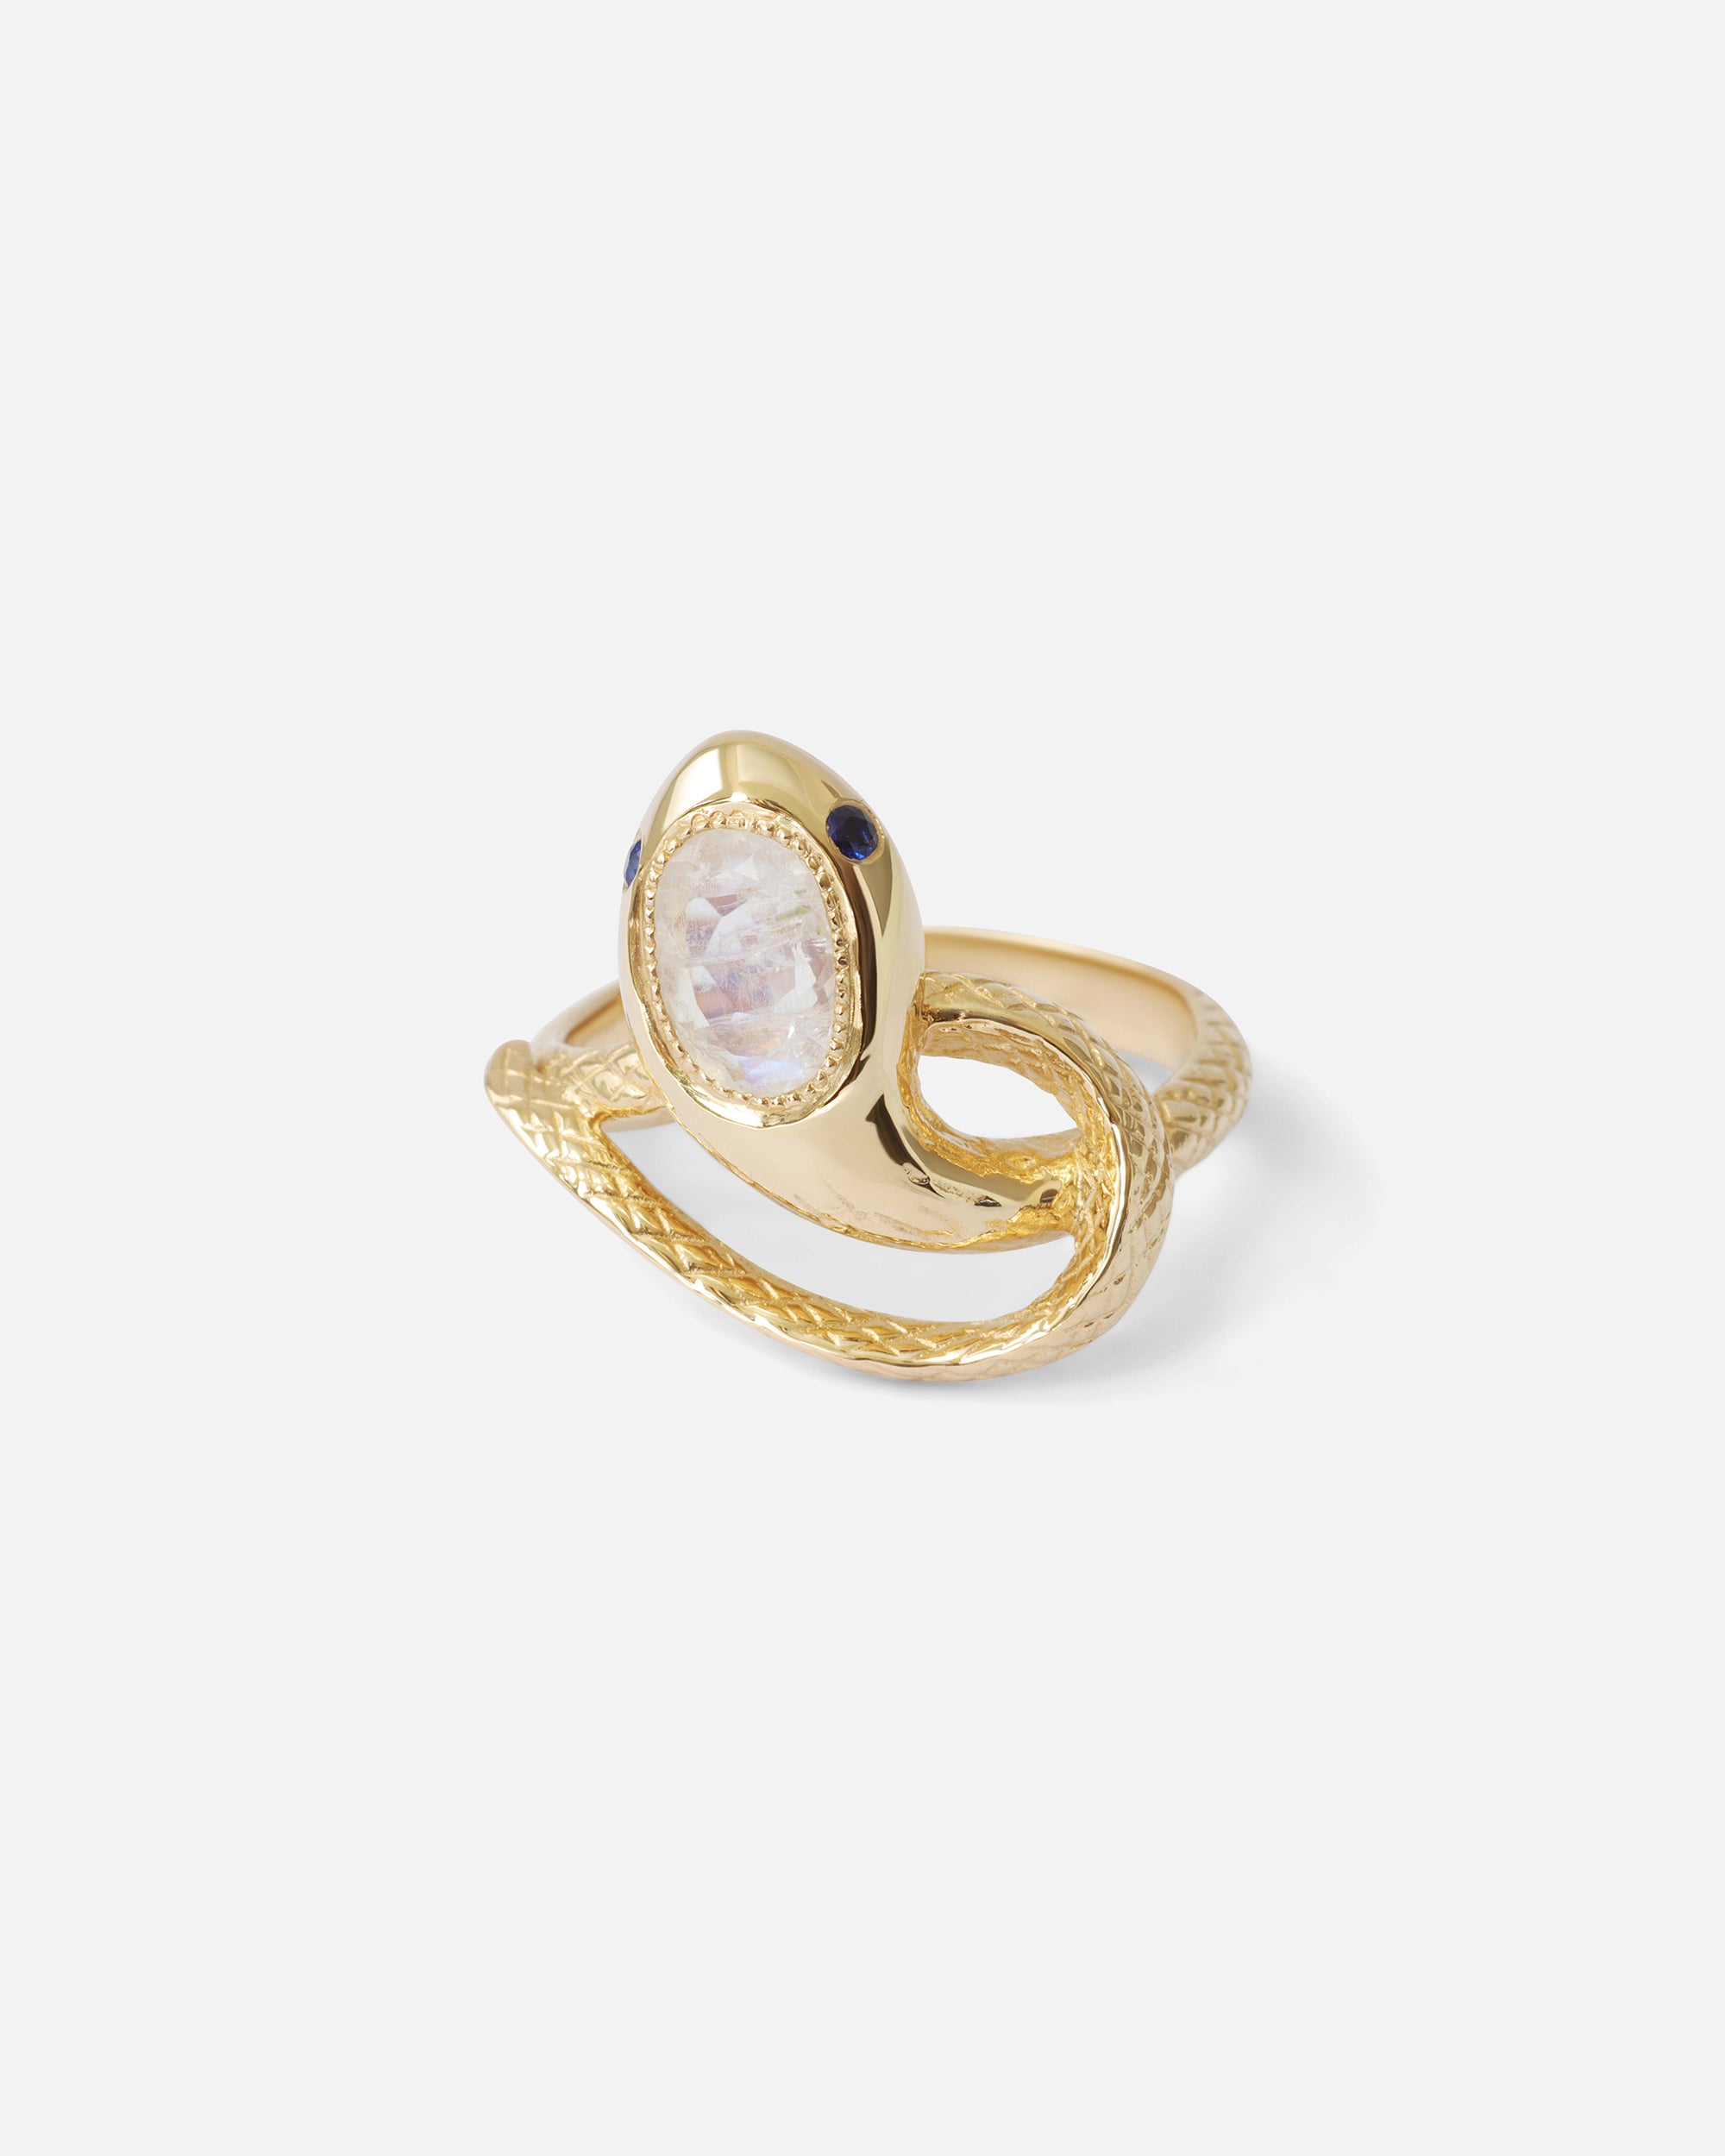 Ophidia Ring / Moonstone By Ides in rings Category